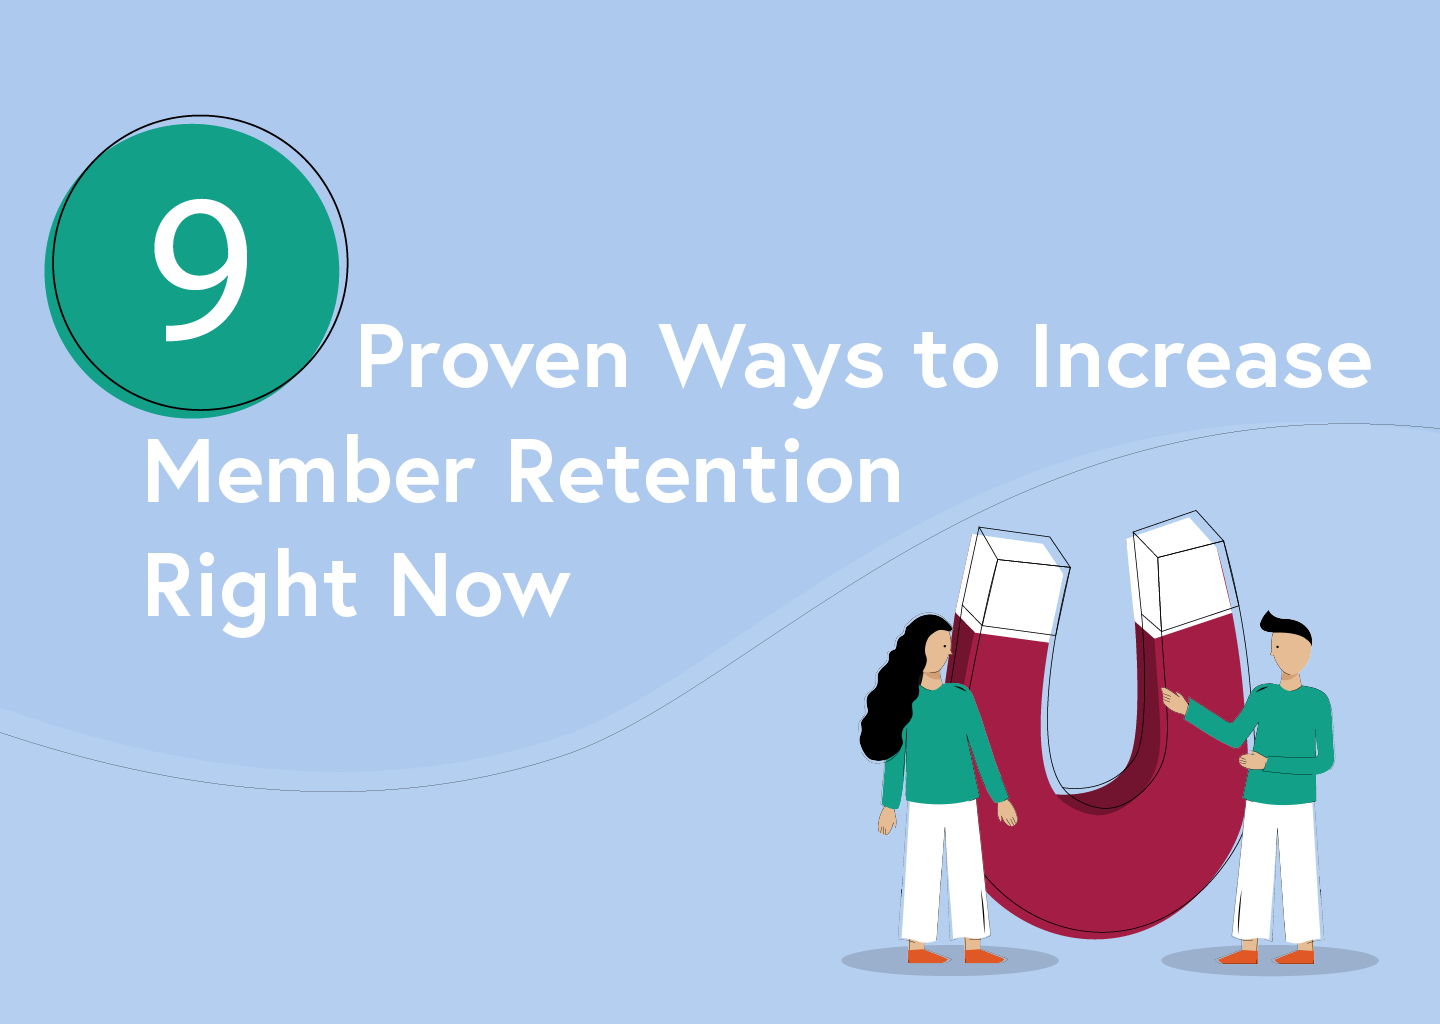 9 Proven Ways to Increase Member Retention Right Now